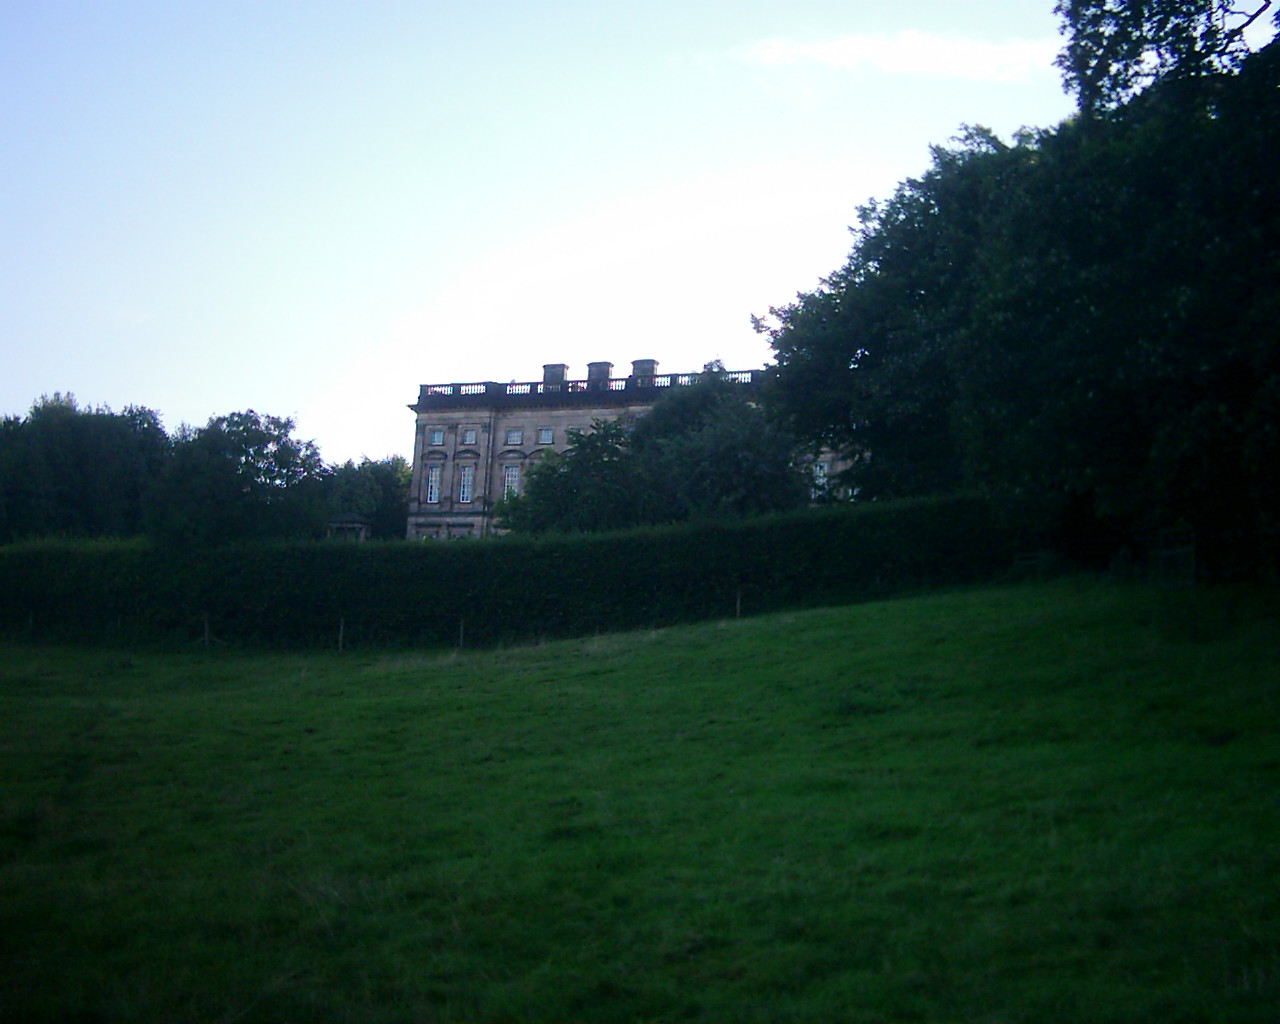 a large building in the background, framed by green grass and trees